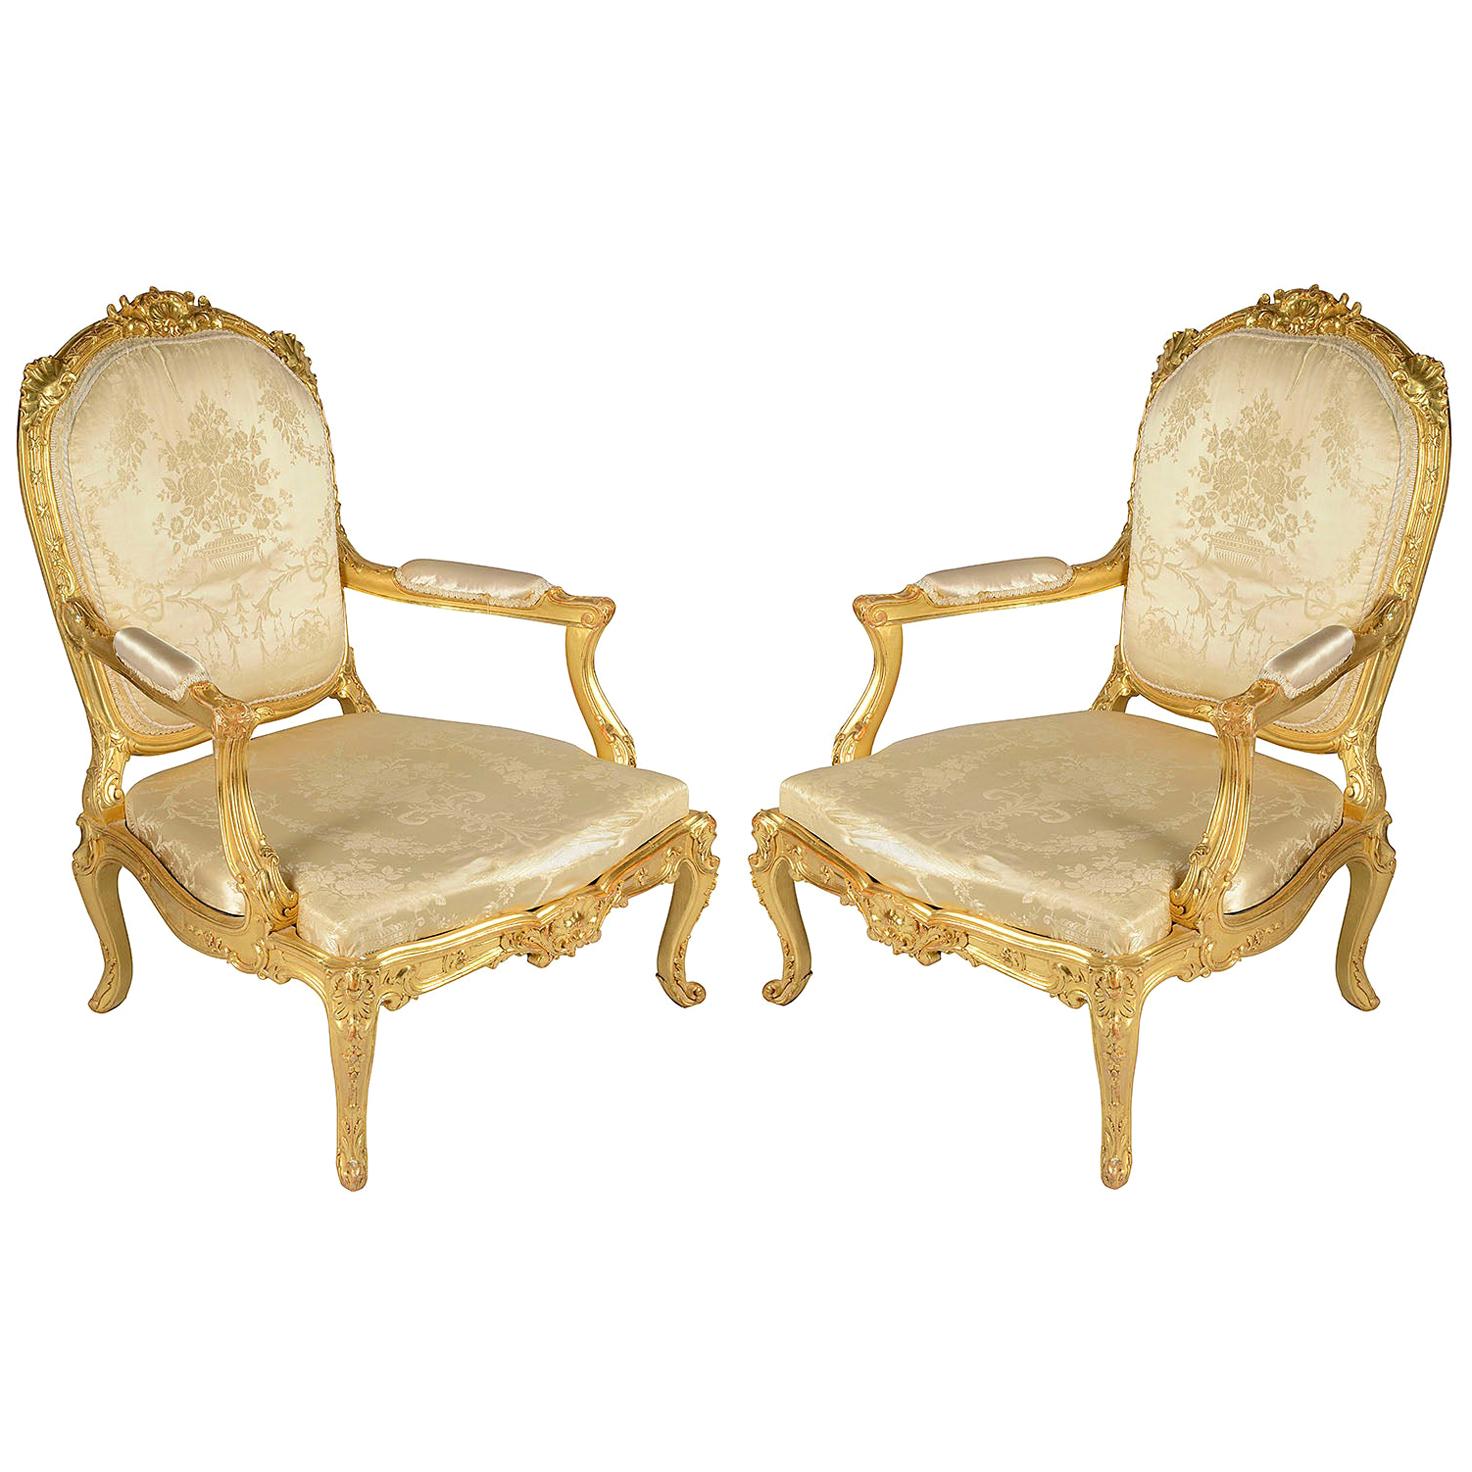 Large Pair of Louis XVI Style Carved Giltwood Salon Chairs, 19th Century